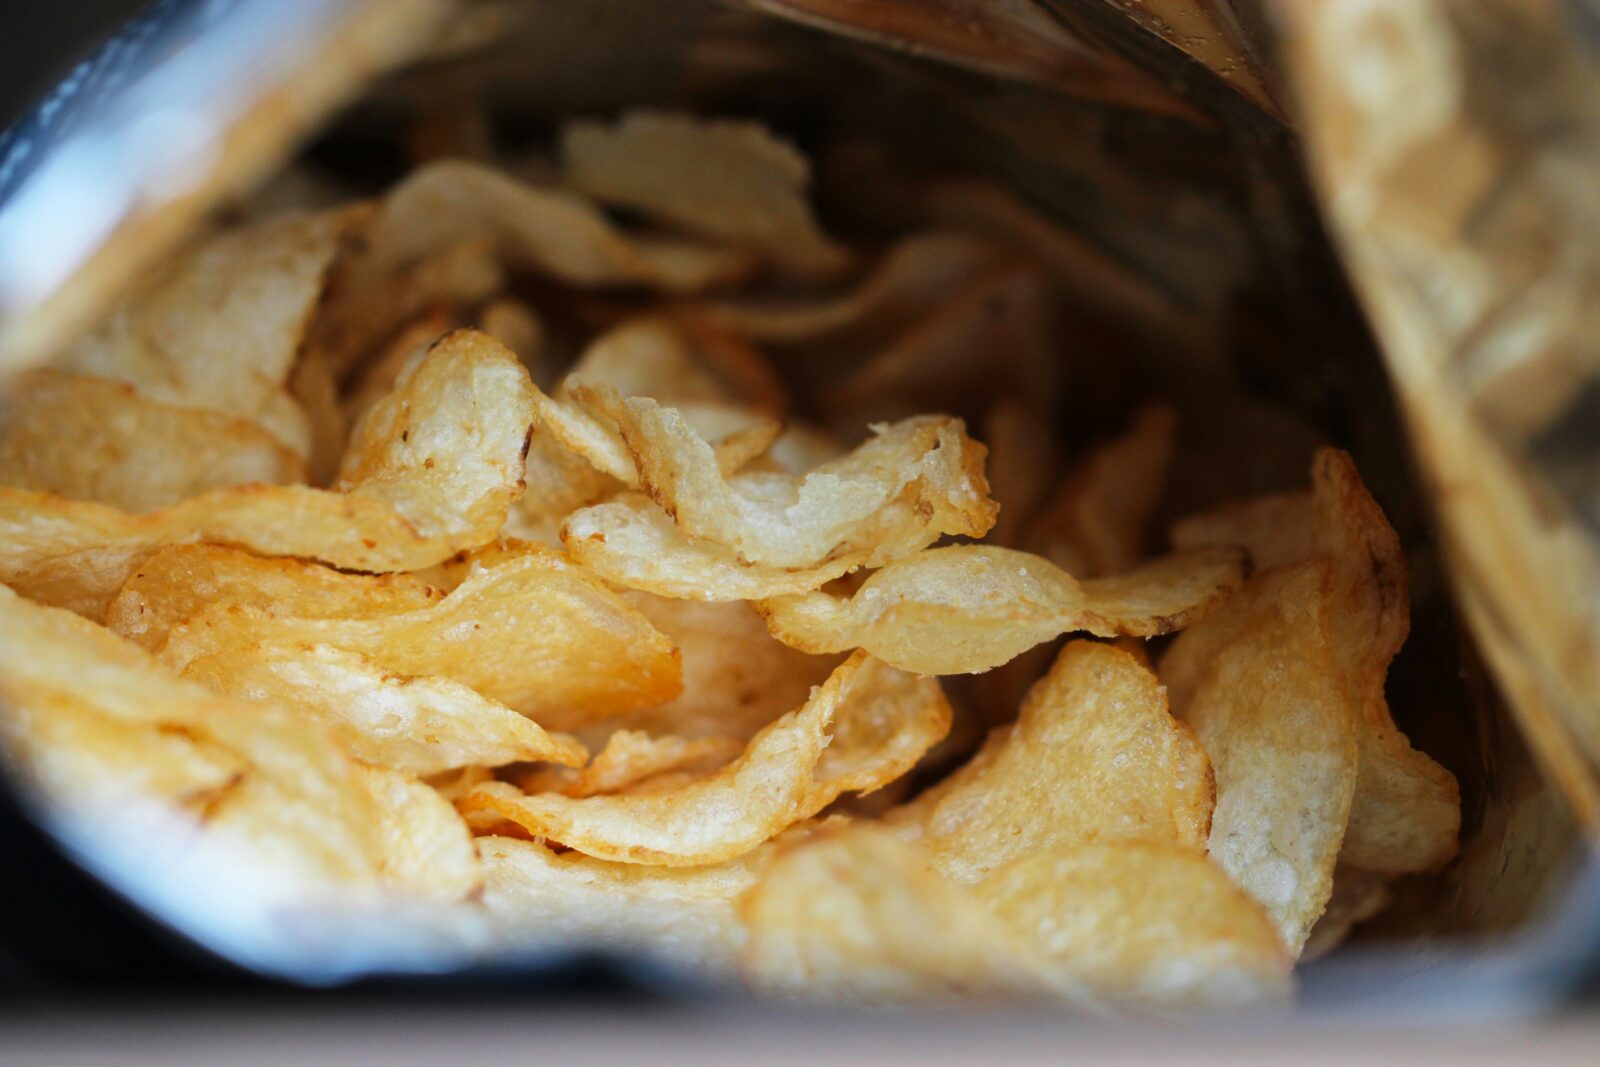 Pub group launches 'bottomless crunch' menu where you can eat unlimited crisps